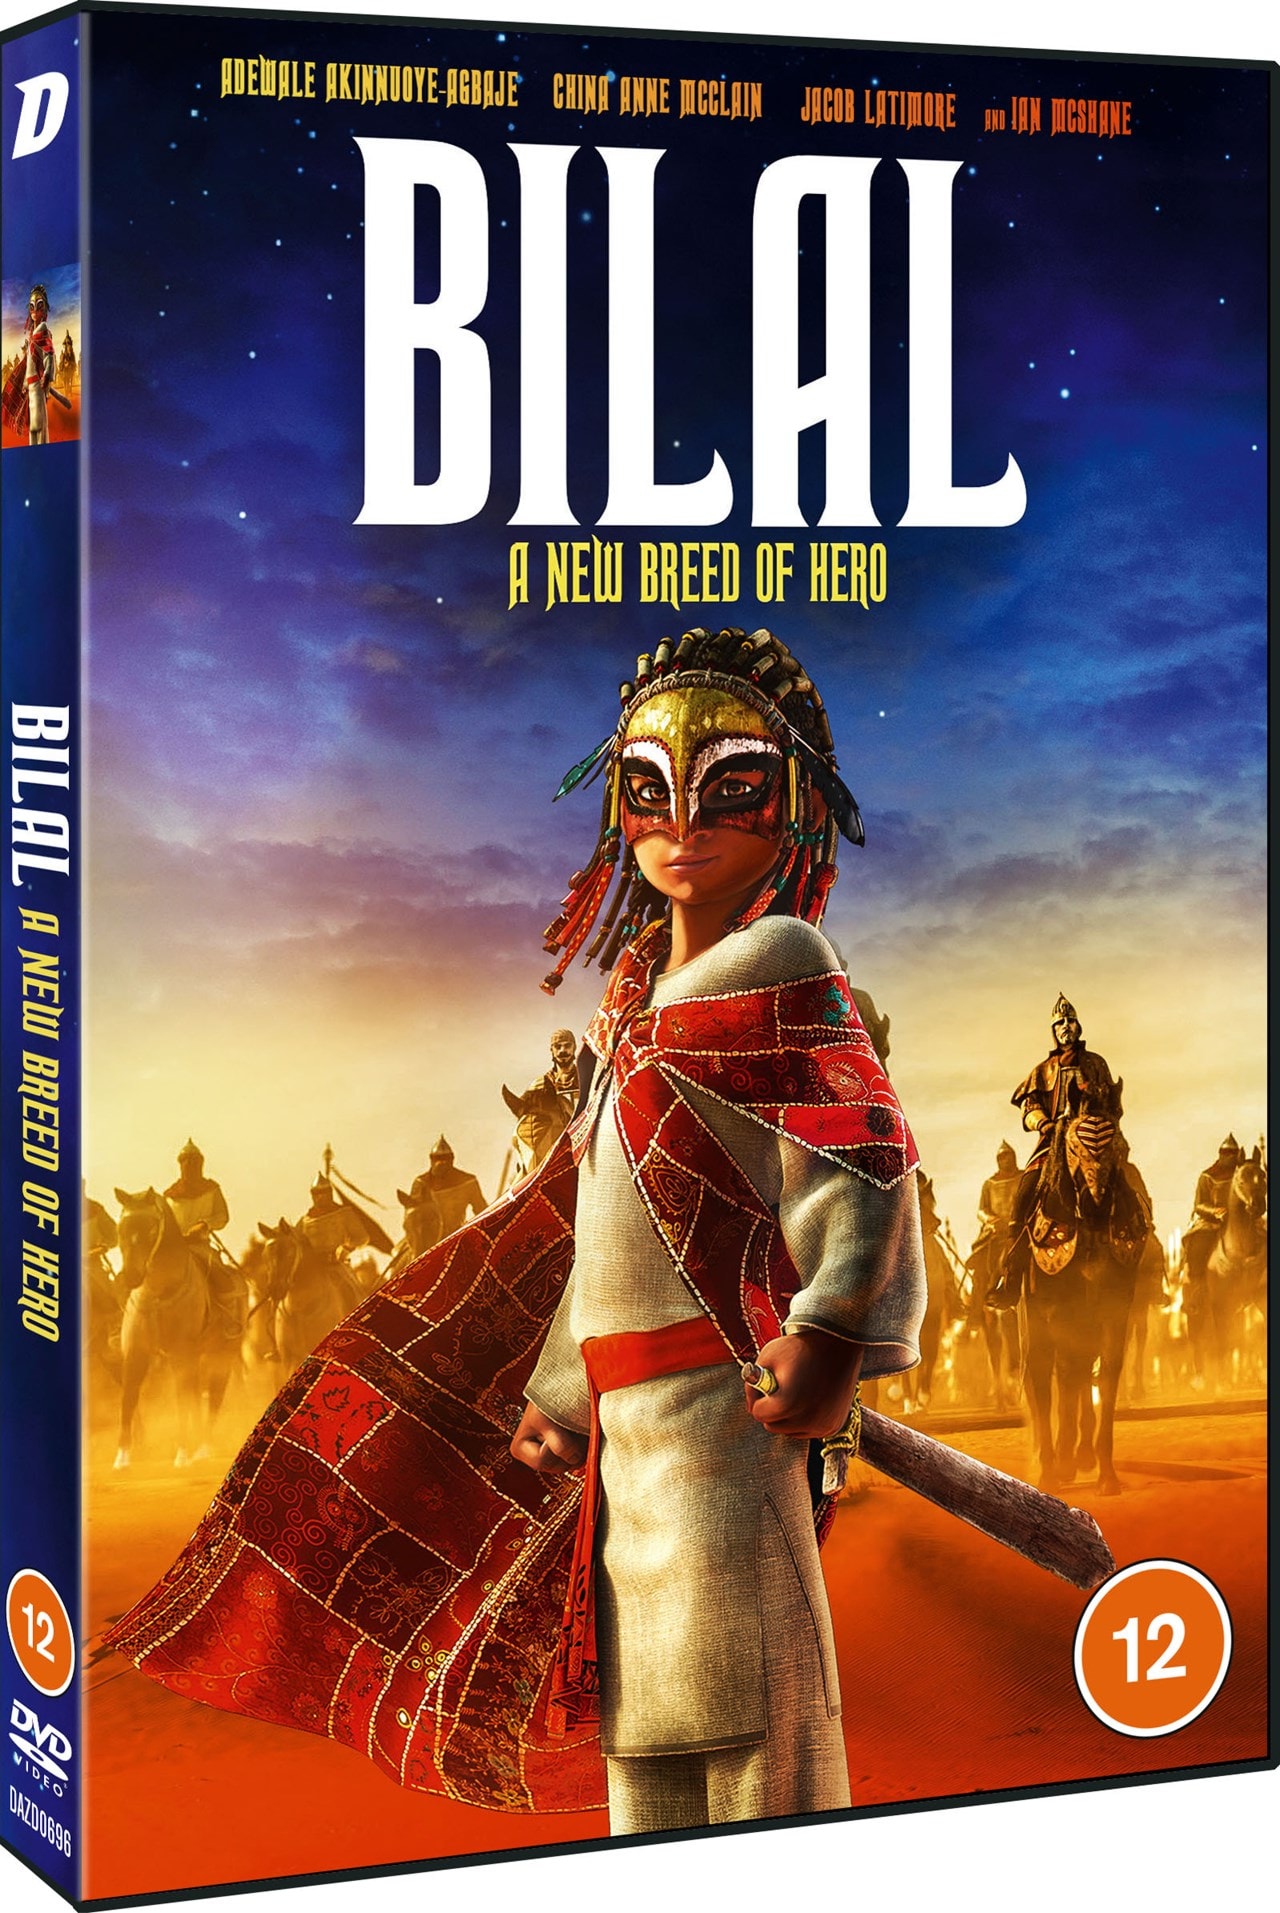 Bilal: A New Breed of Hero | DVD | Free shipping over £20 ...